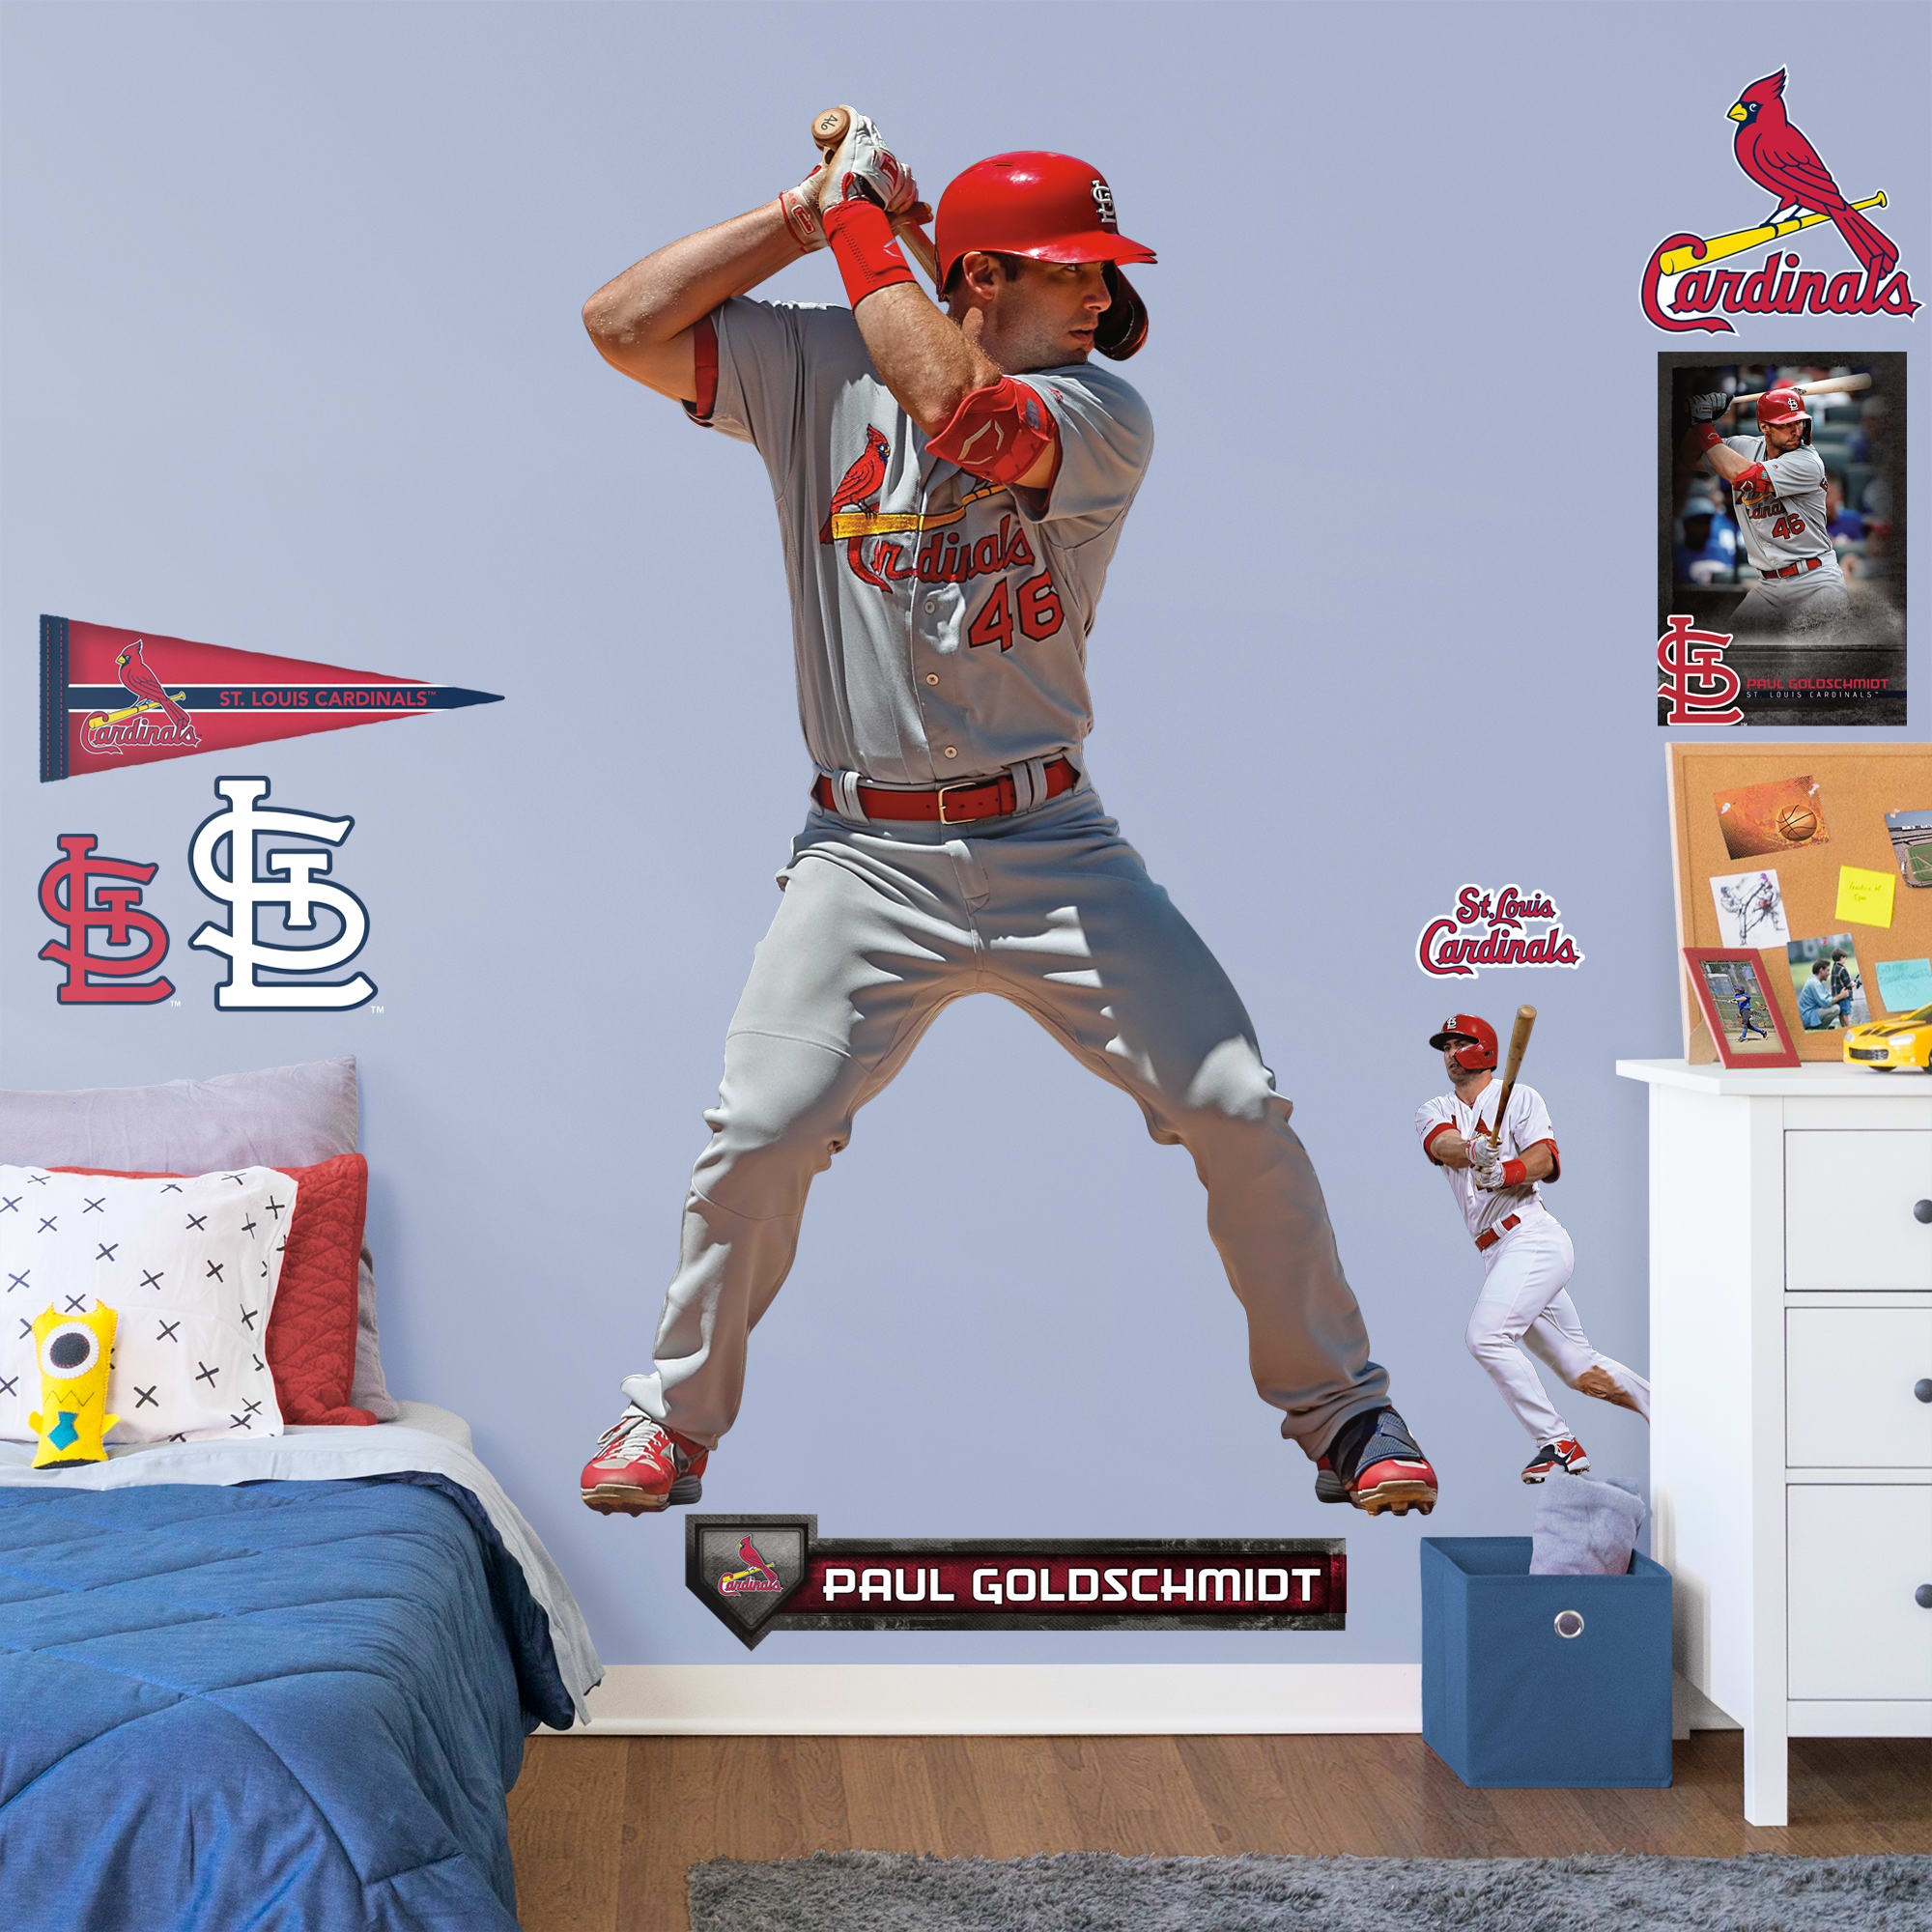 Paul Goldschmidt for St Louis Cardinals - MLB Removable Wall Decal Giant Athlete + 2 Wall Decals 31W x 51H